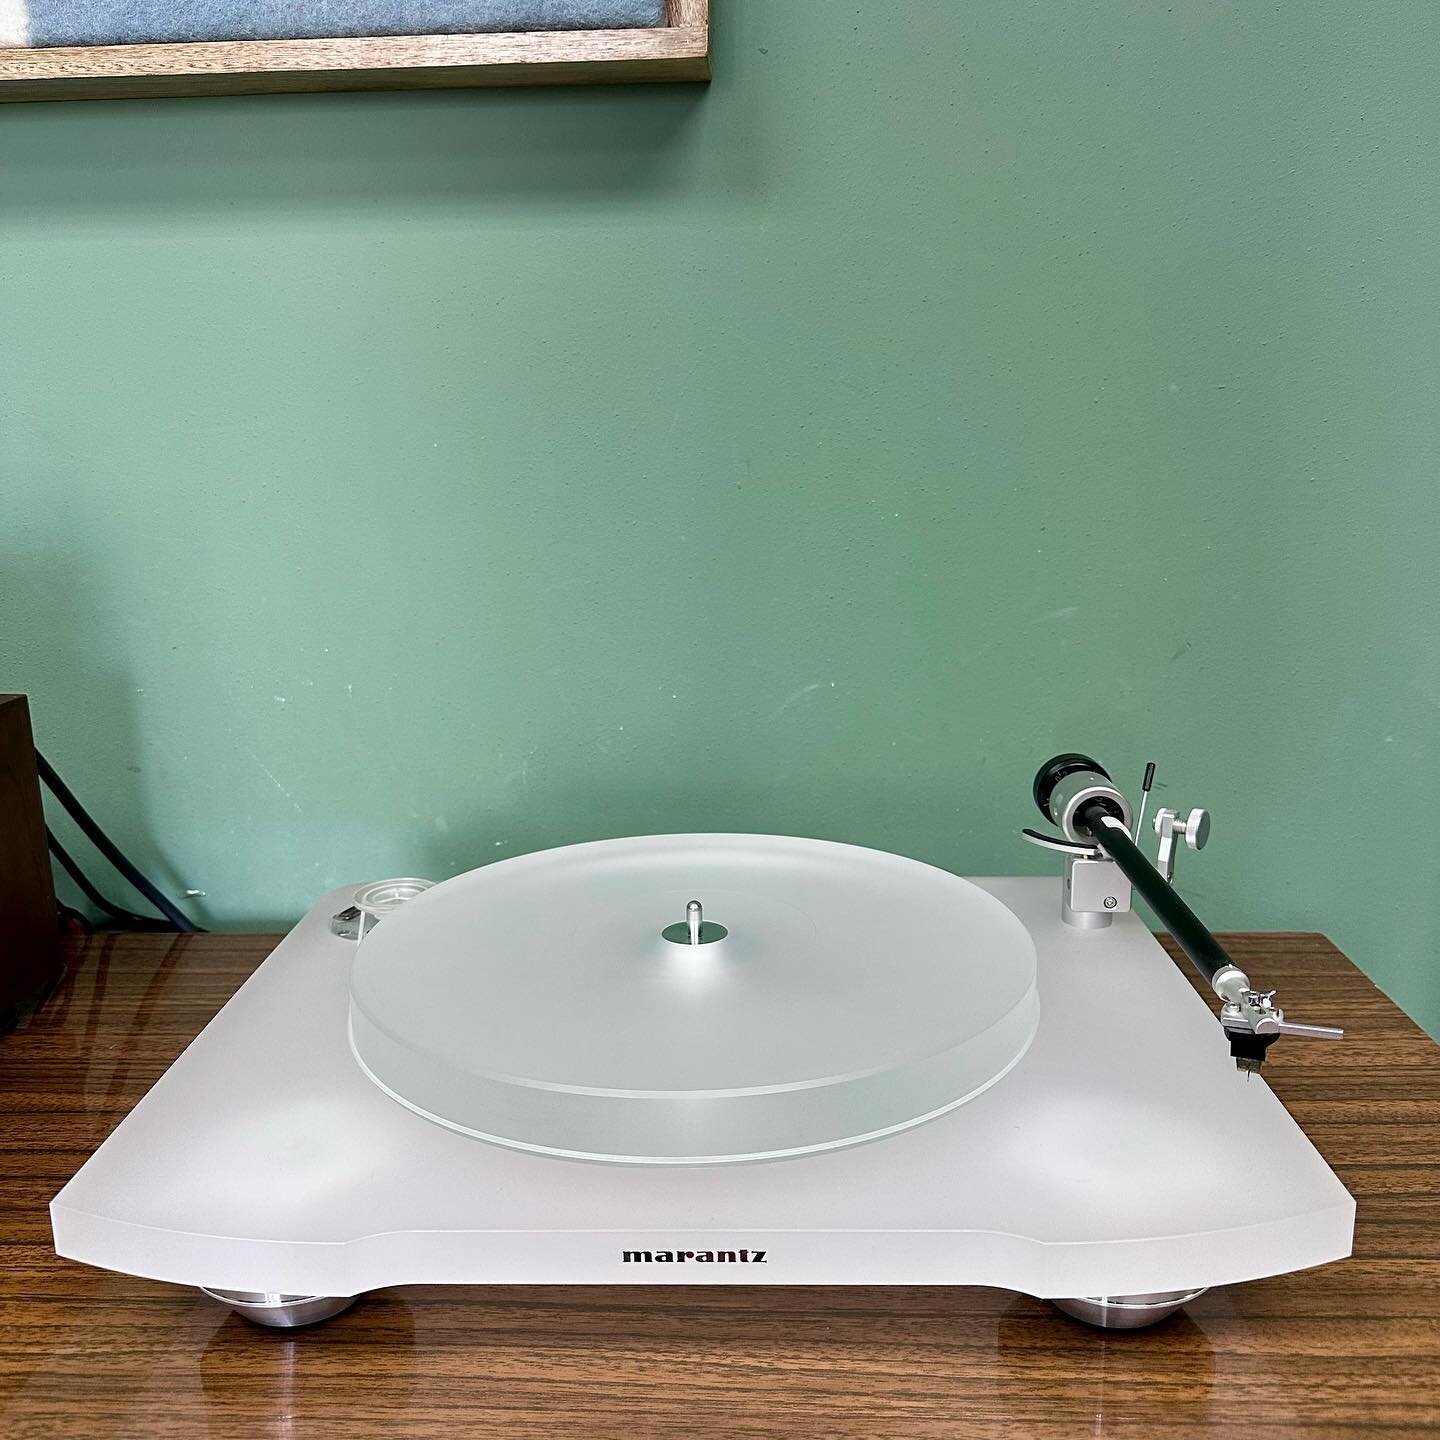 [AVAILABLE] Beautiful contemporary looks meet audiophile functionality in this Marantz TT-15S1 turntable. Made by Clearaudio in Germany, this fully manual belt drive turntable features a Clearaudio Virtuoso Ebony II cartridge (a $1200 value) as well 